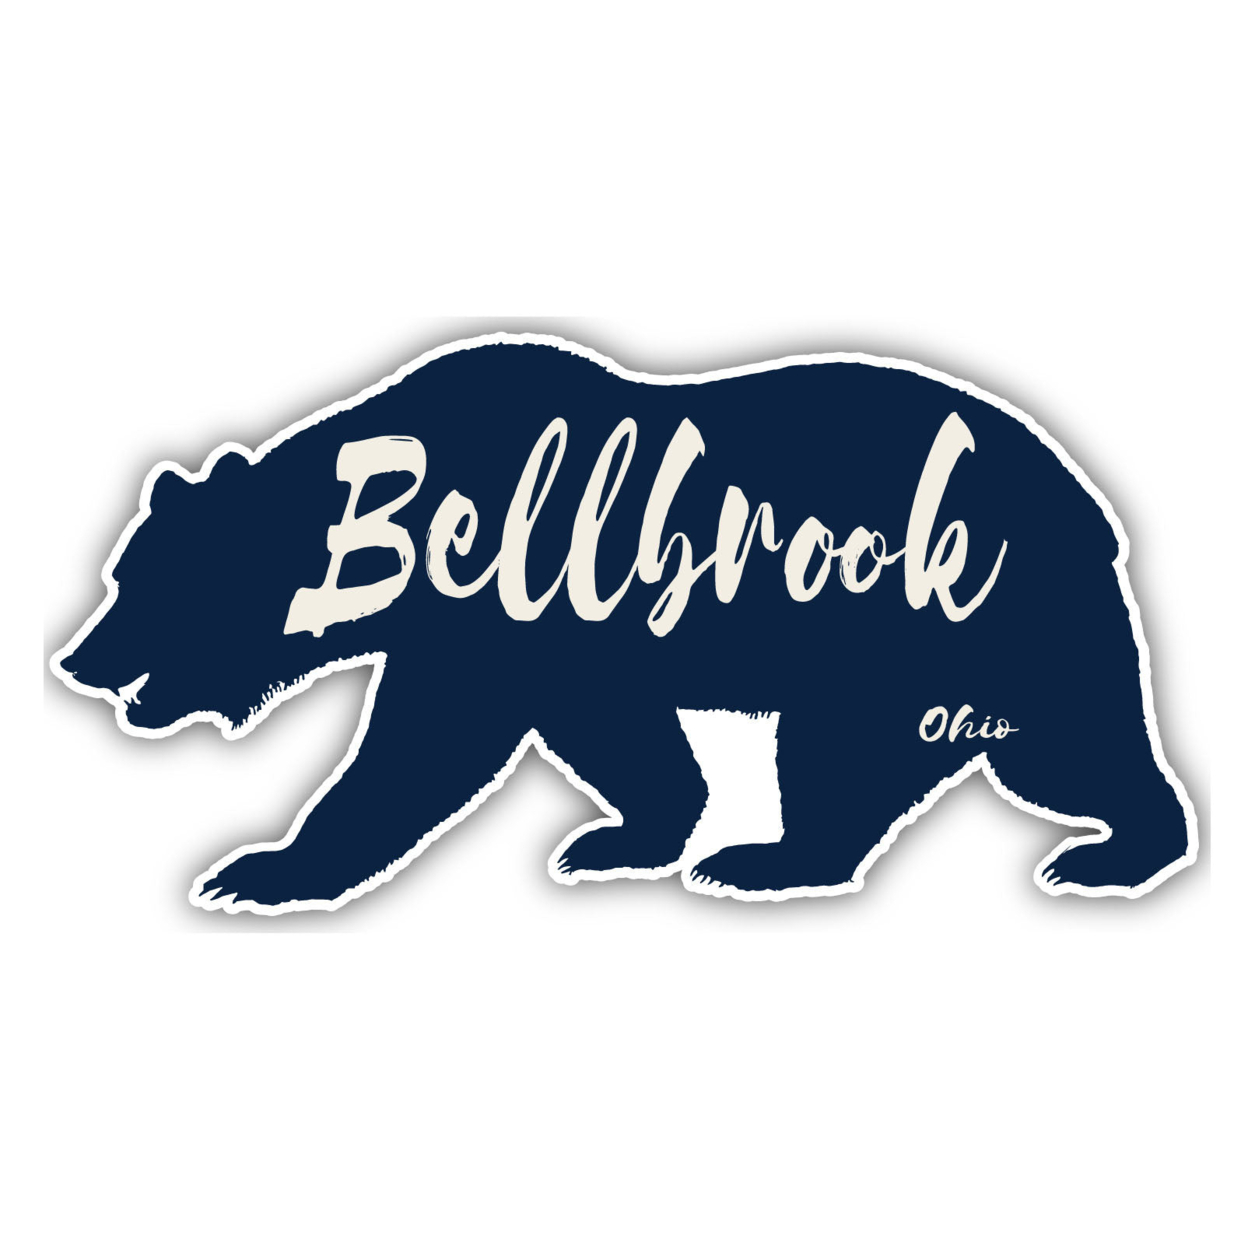 Bellbrook Ohio Souvenir Decorative Stickers (Choose Theme And Size) - 4-Pack, 2-Inch, Bear